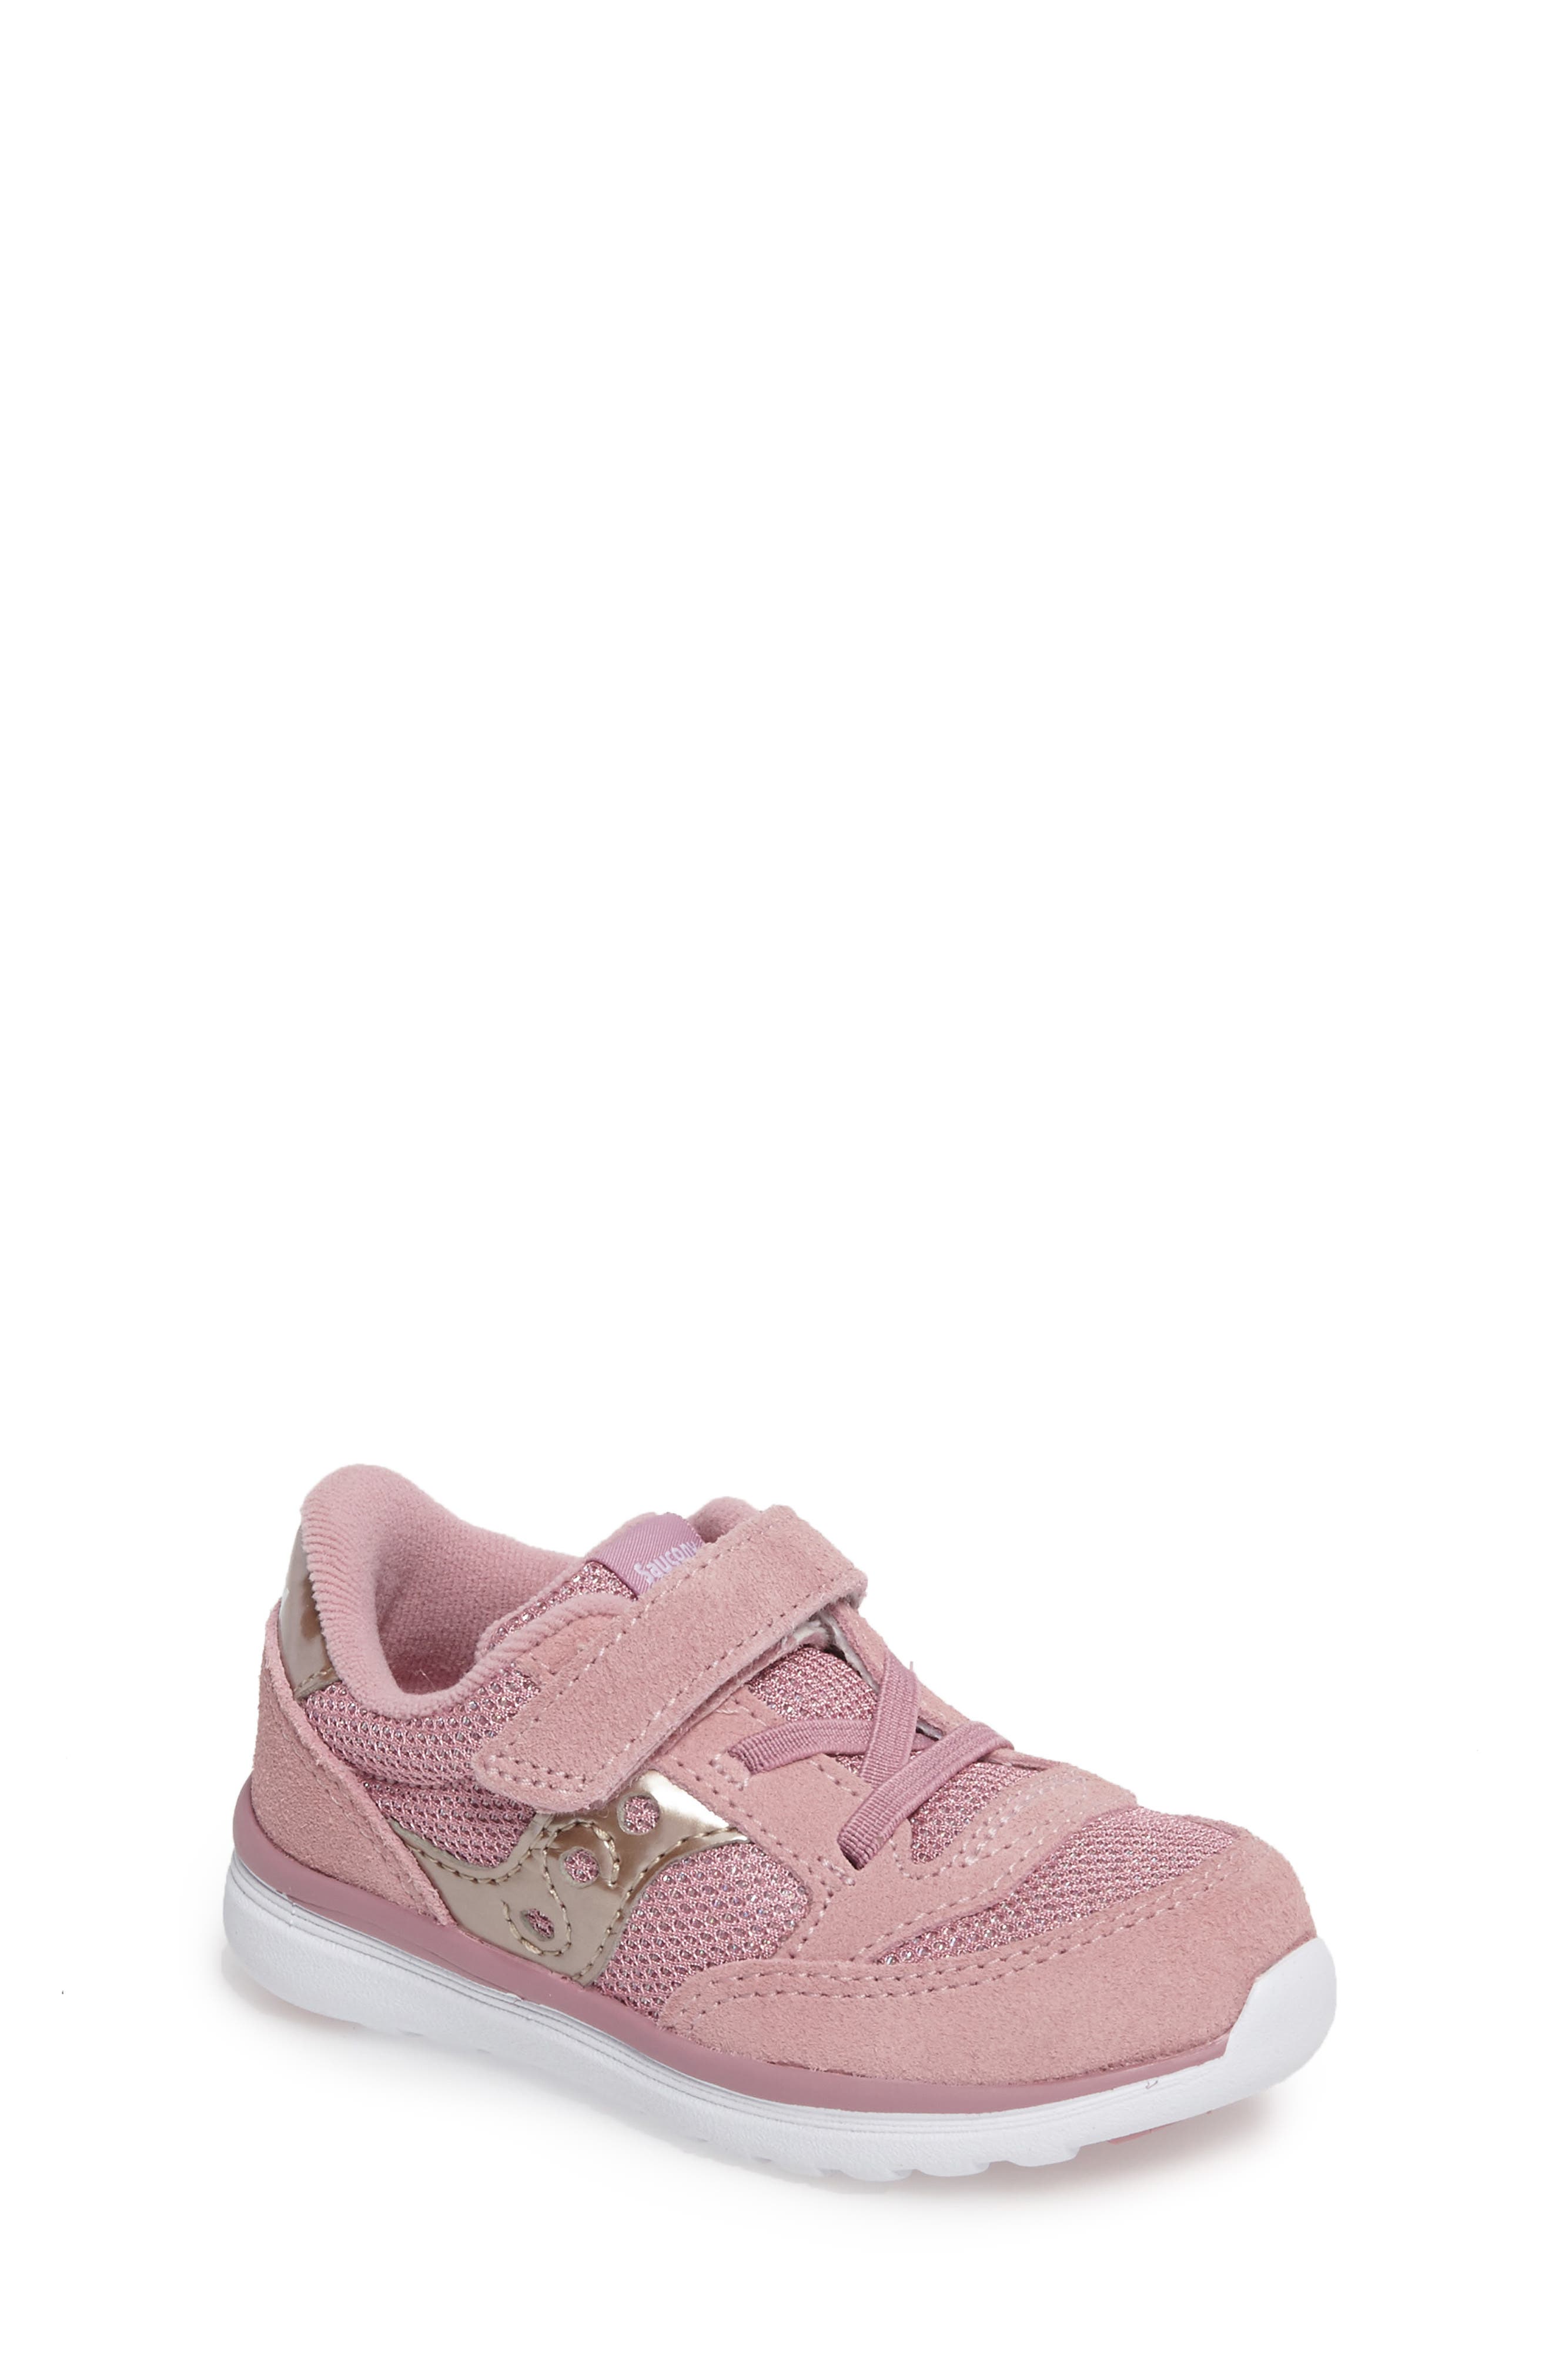 toddler saucony shoes sale